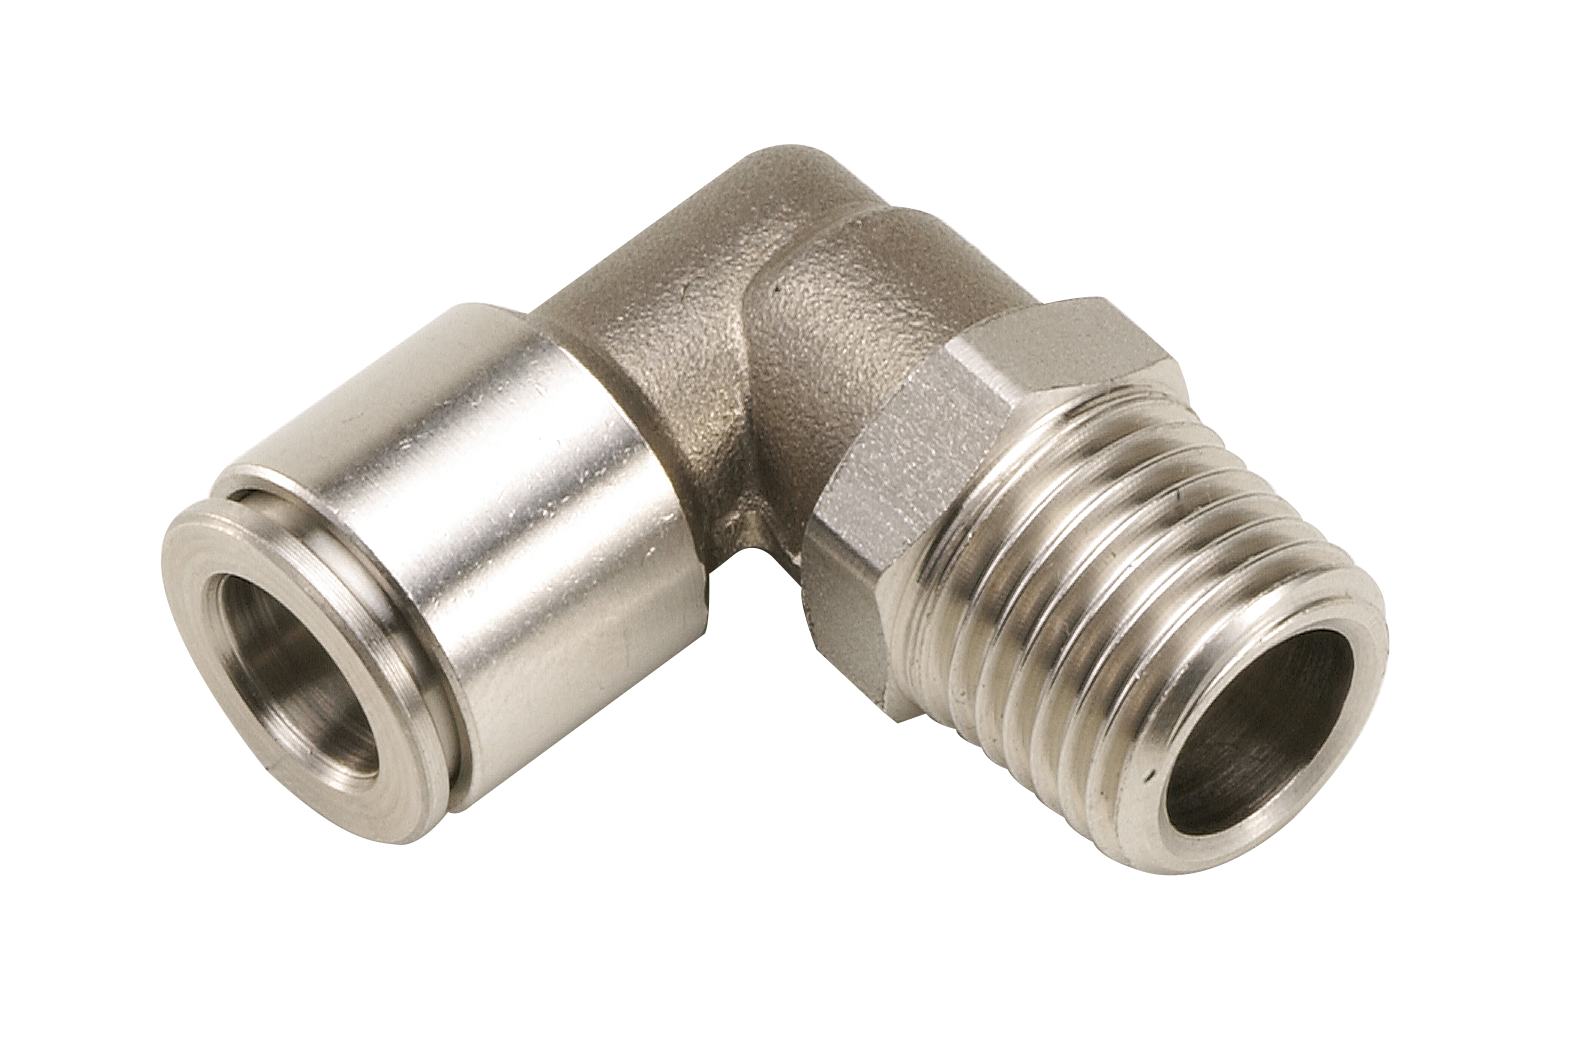 Implantation’s fittings SWIVEL MALE ELBOW FITTING, TAPER Fittings and quick-connect couplings